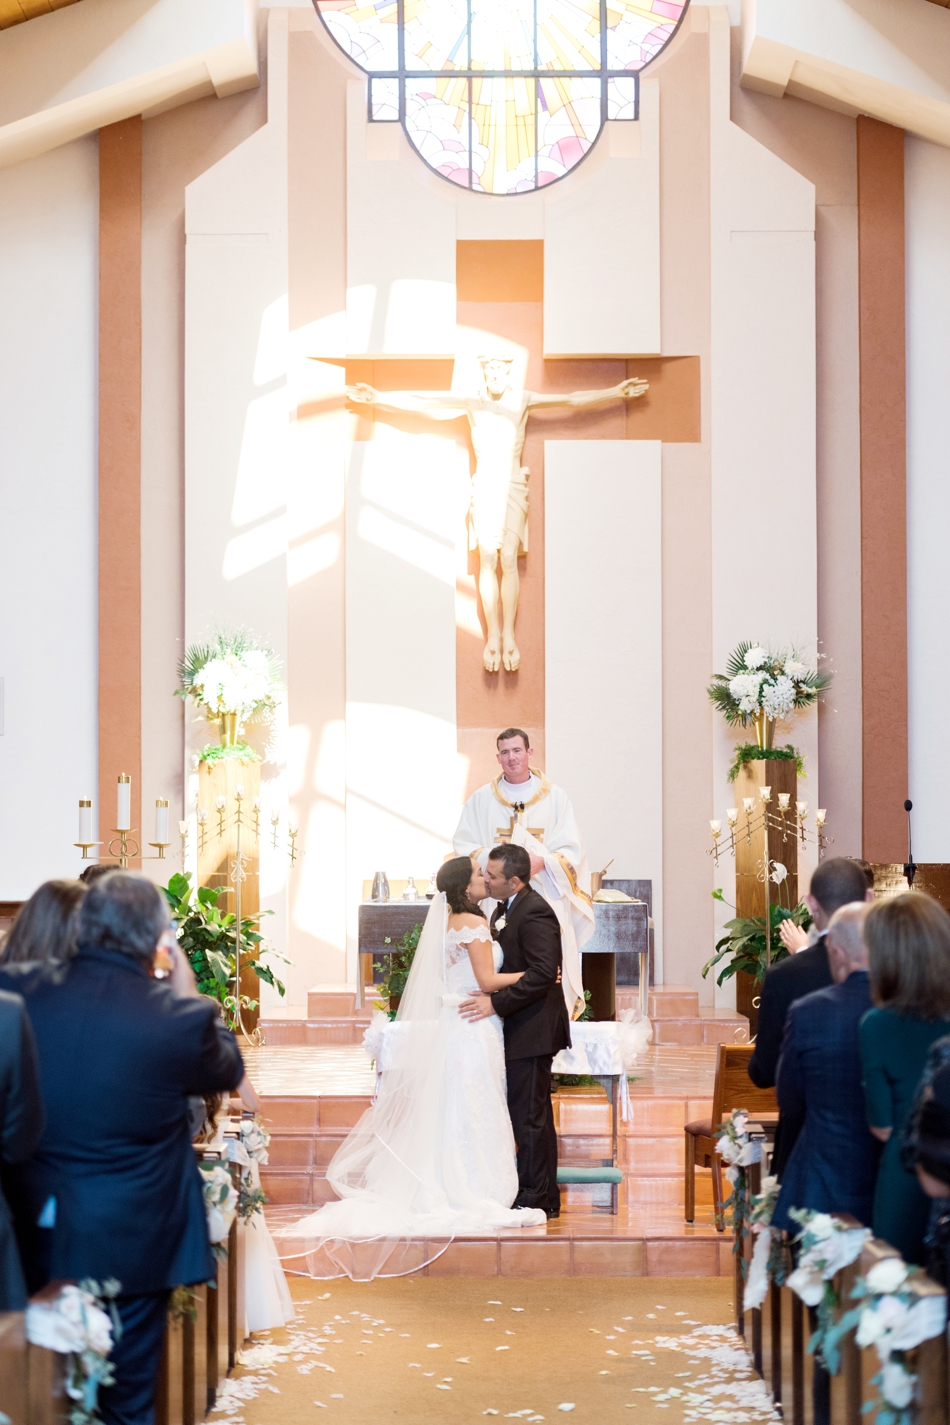 Classic Catholic wedding at the Vinoy in St. Petersburg